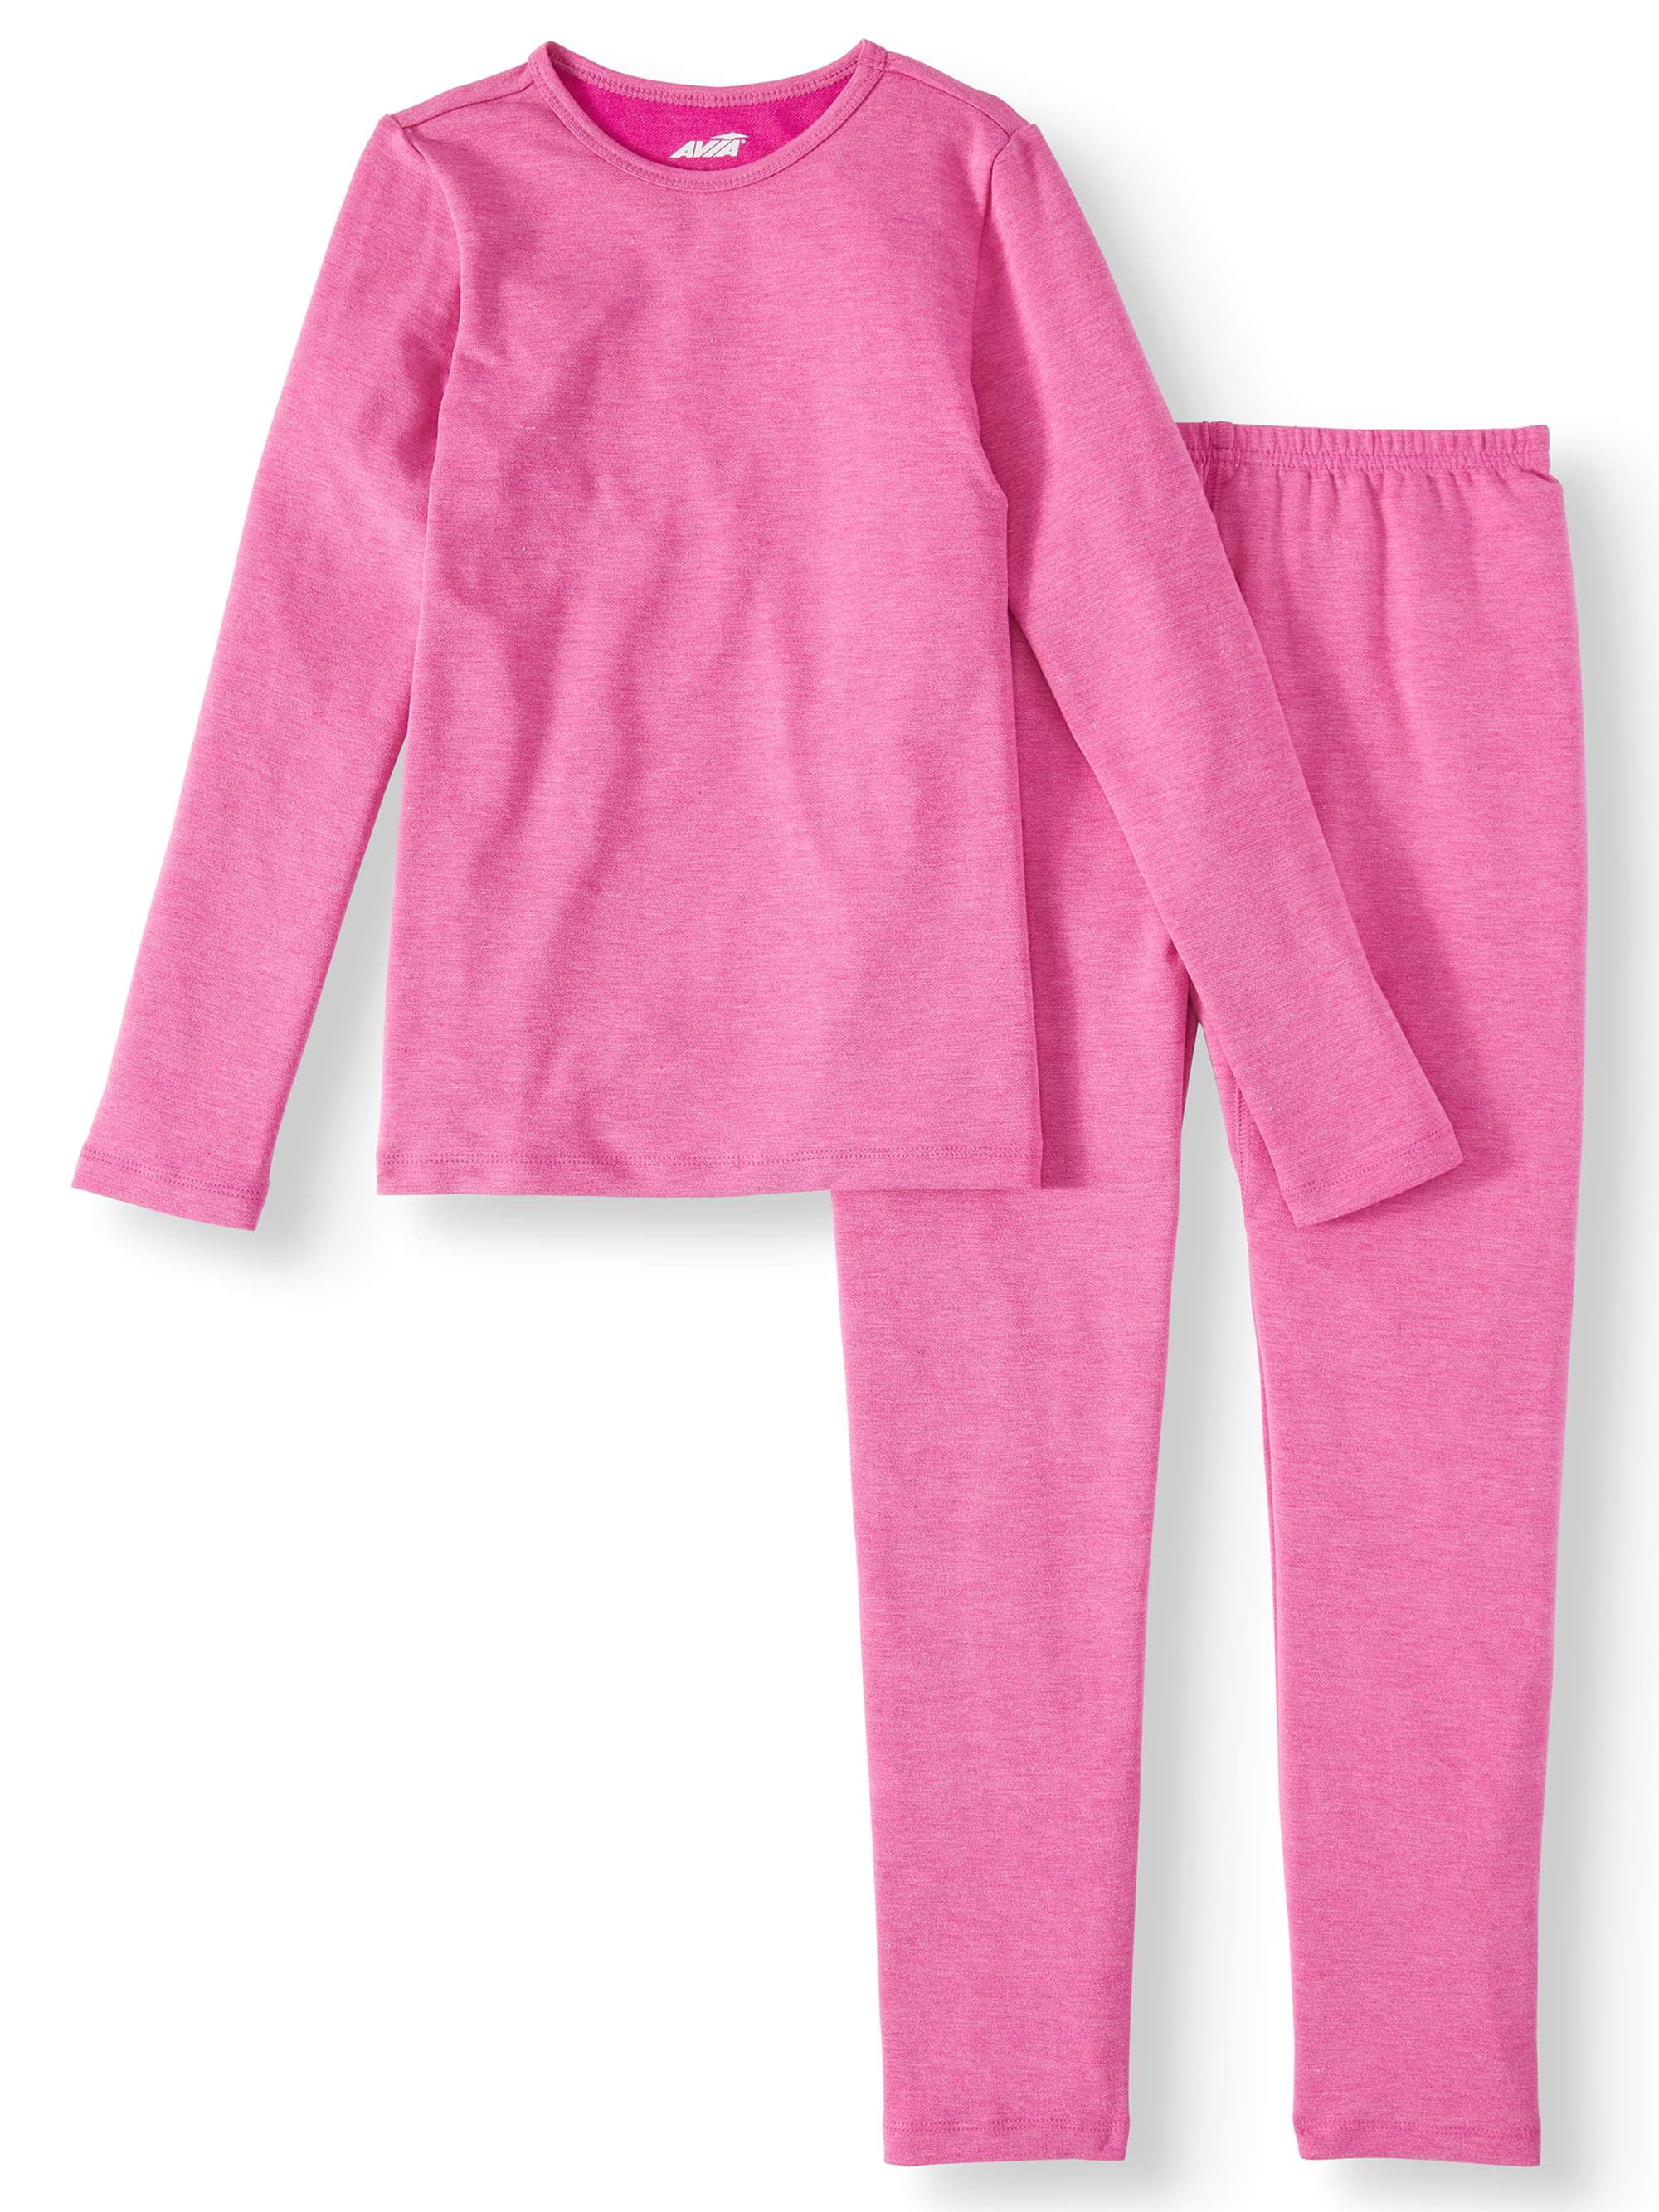 Avia Girls' Performance Super Soft French Terry Thermal Underwear, 2 ...